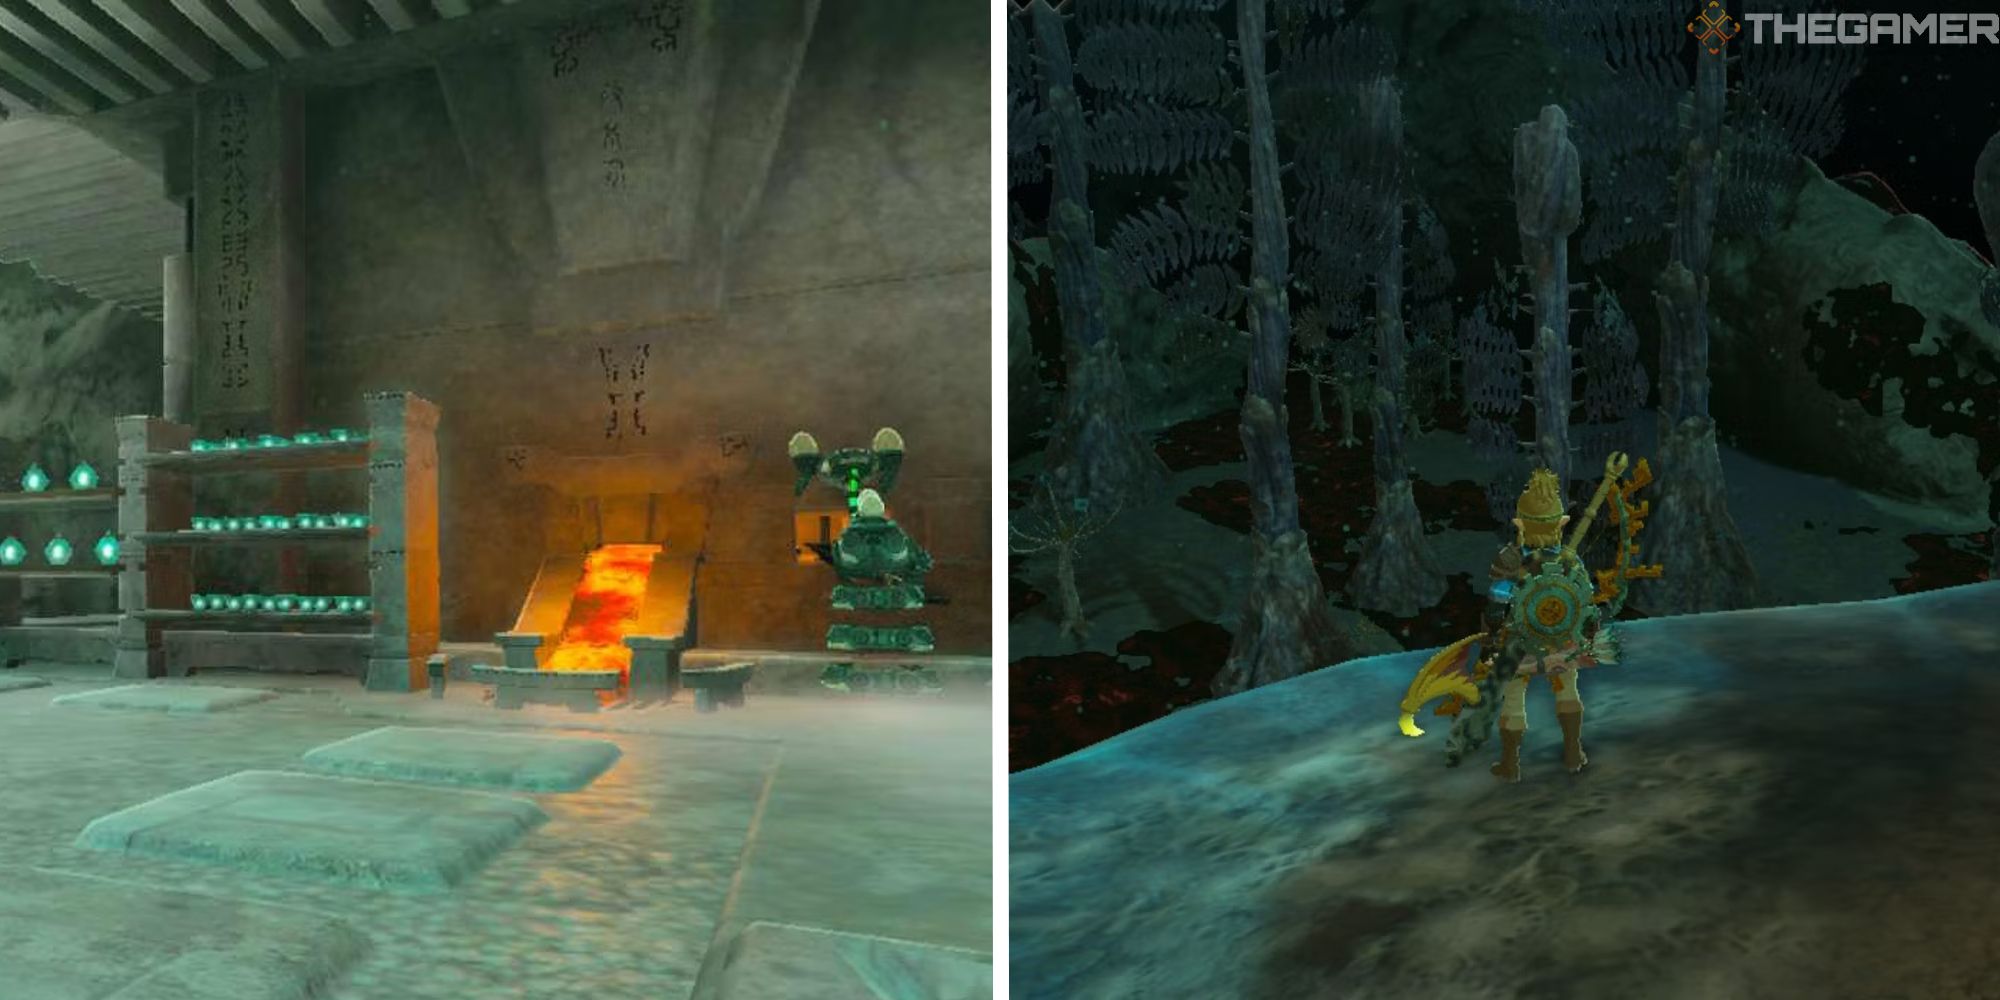 split image showing forge construct next to image of link in the depths